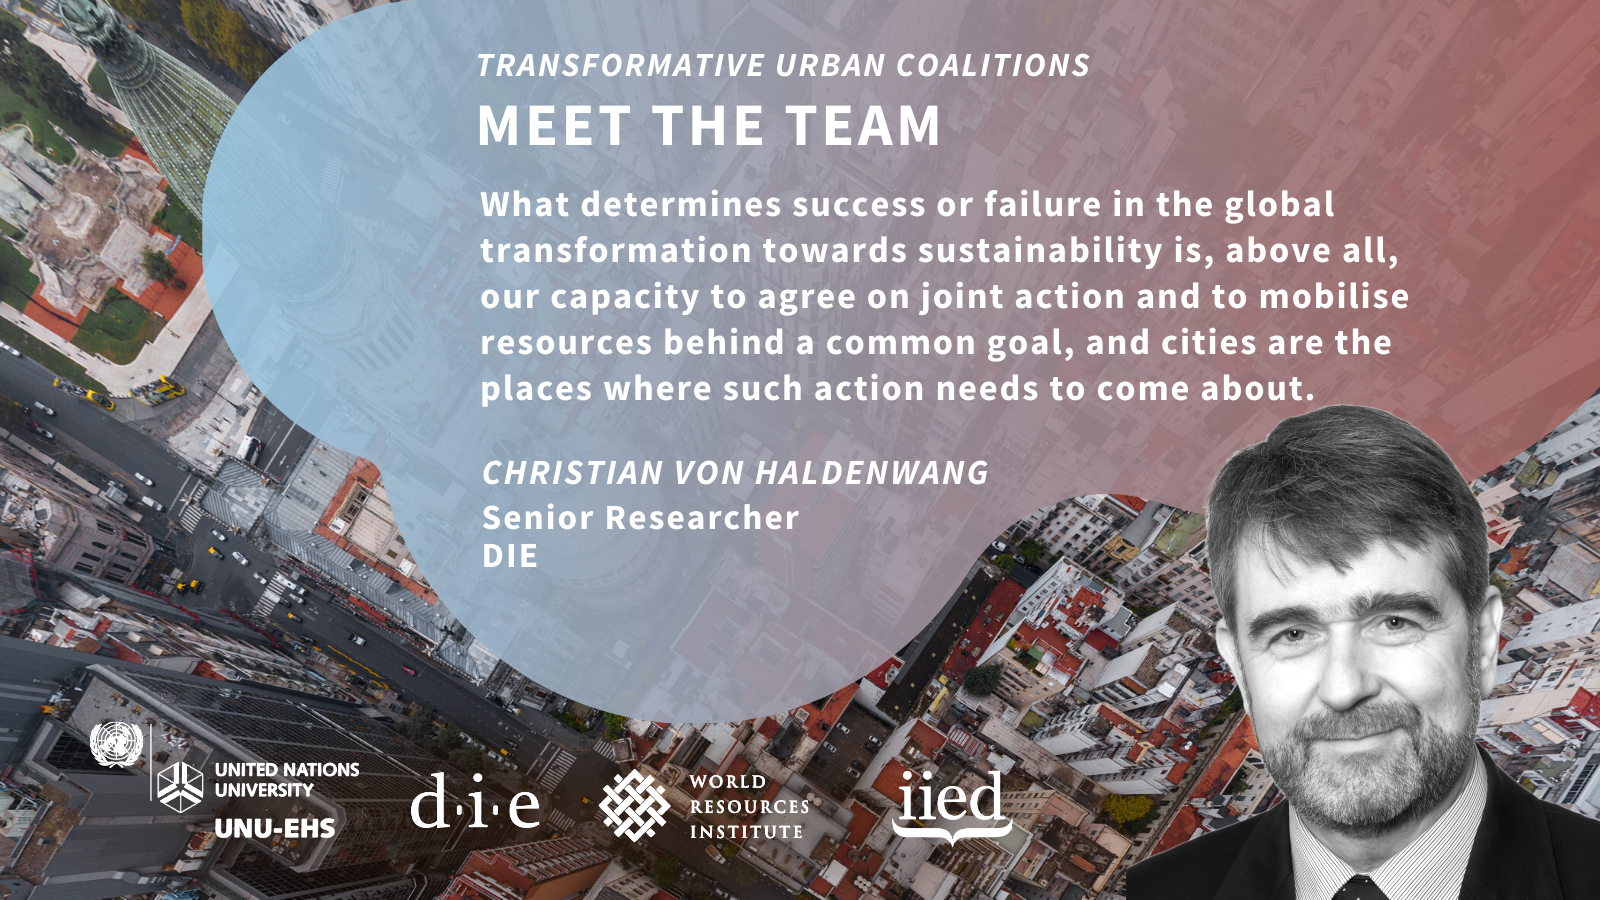 Quote by Christian von Haldenwang: "What determins succes or failure in the global transformation towards sustainability is, above all, our capacity to agree on joint action and to mobilise resources behind a common goal, and cities are the places where such action needs to come about"